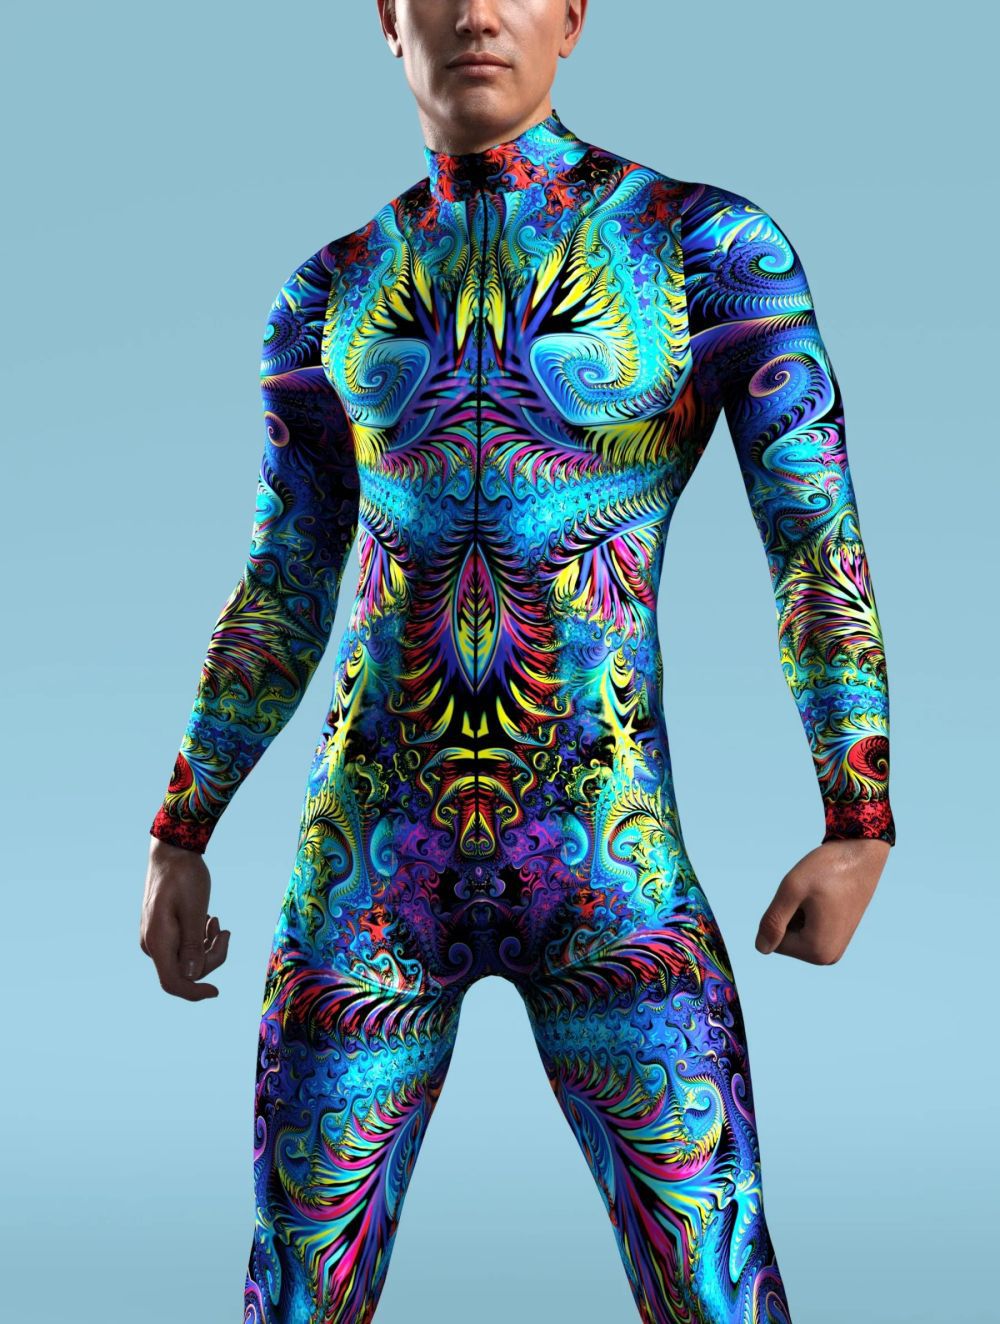 A person wearing a colorful, psychedelic-patterned Maramalive™ Halloween Tights 3D Digital Printing Cos One-piece Play Costume with long sleeves stands against a light blue background.